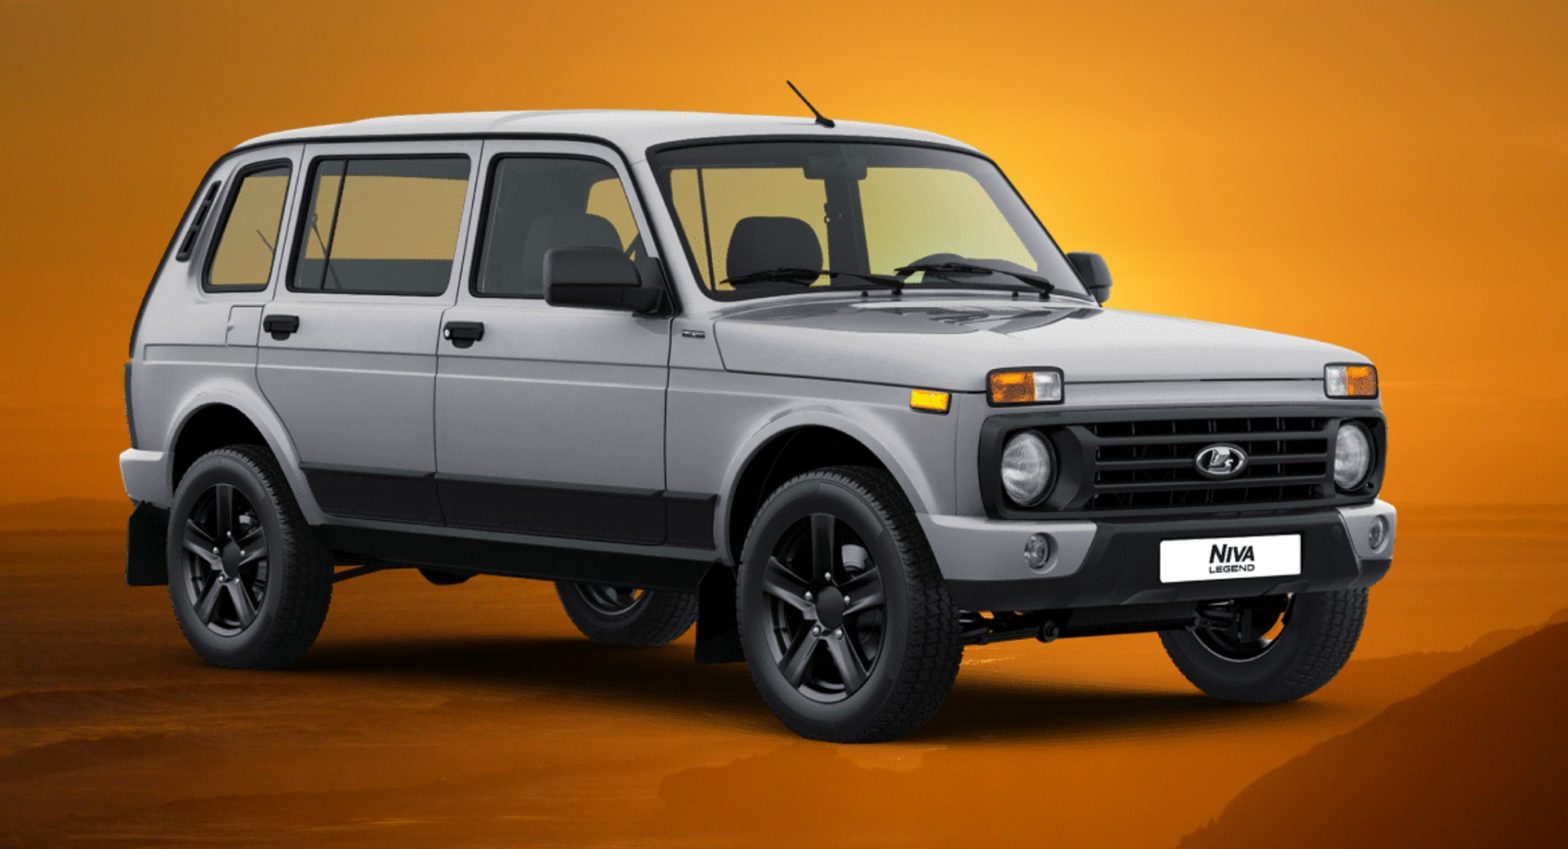 Lada To Retire The Five-Door Niva Legend By The End Of 2021